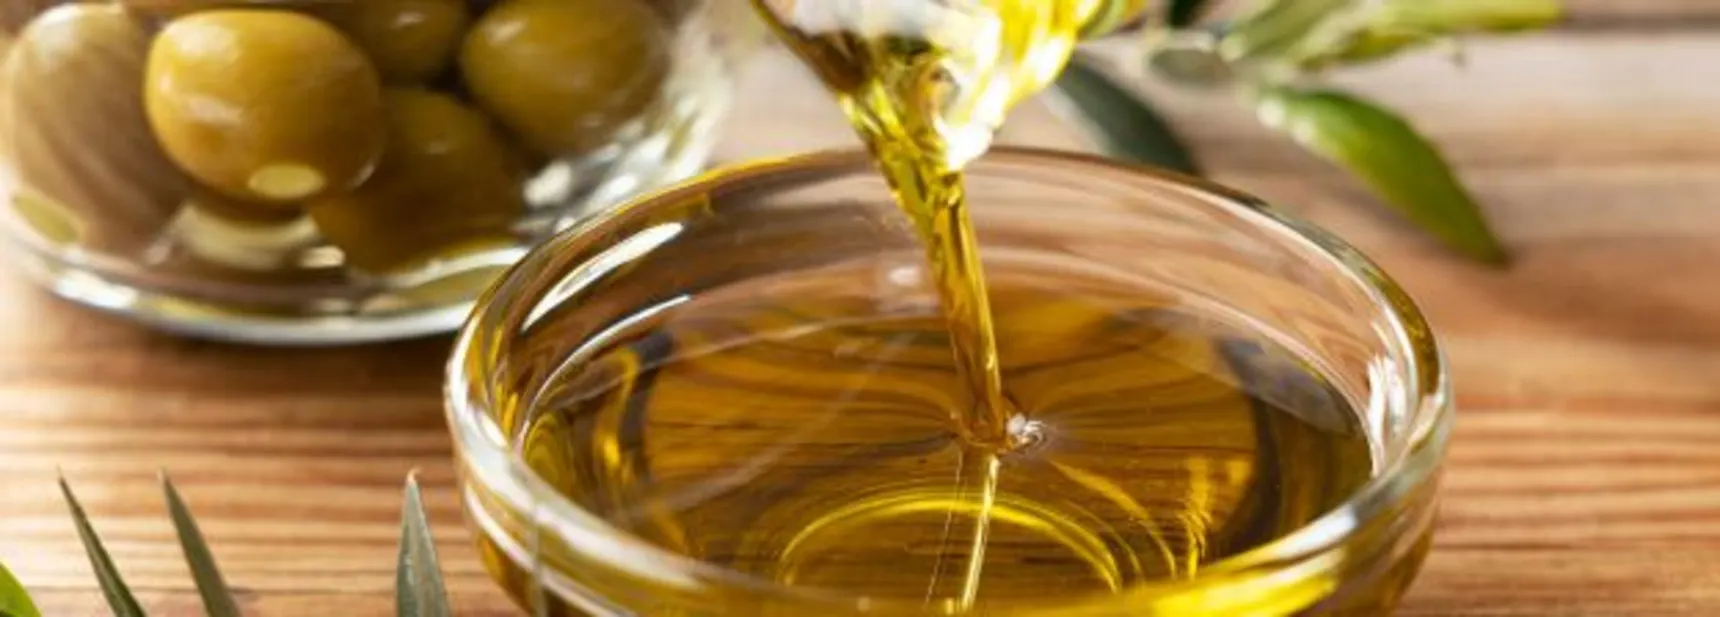 Cooking Oils & Fat Products